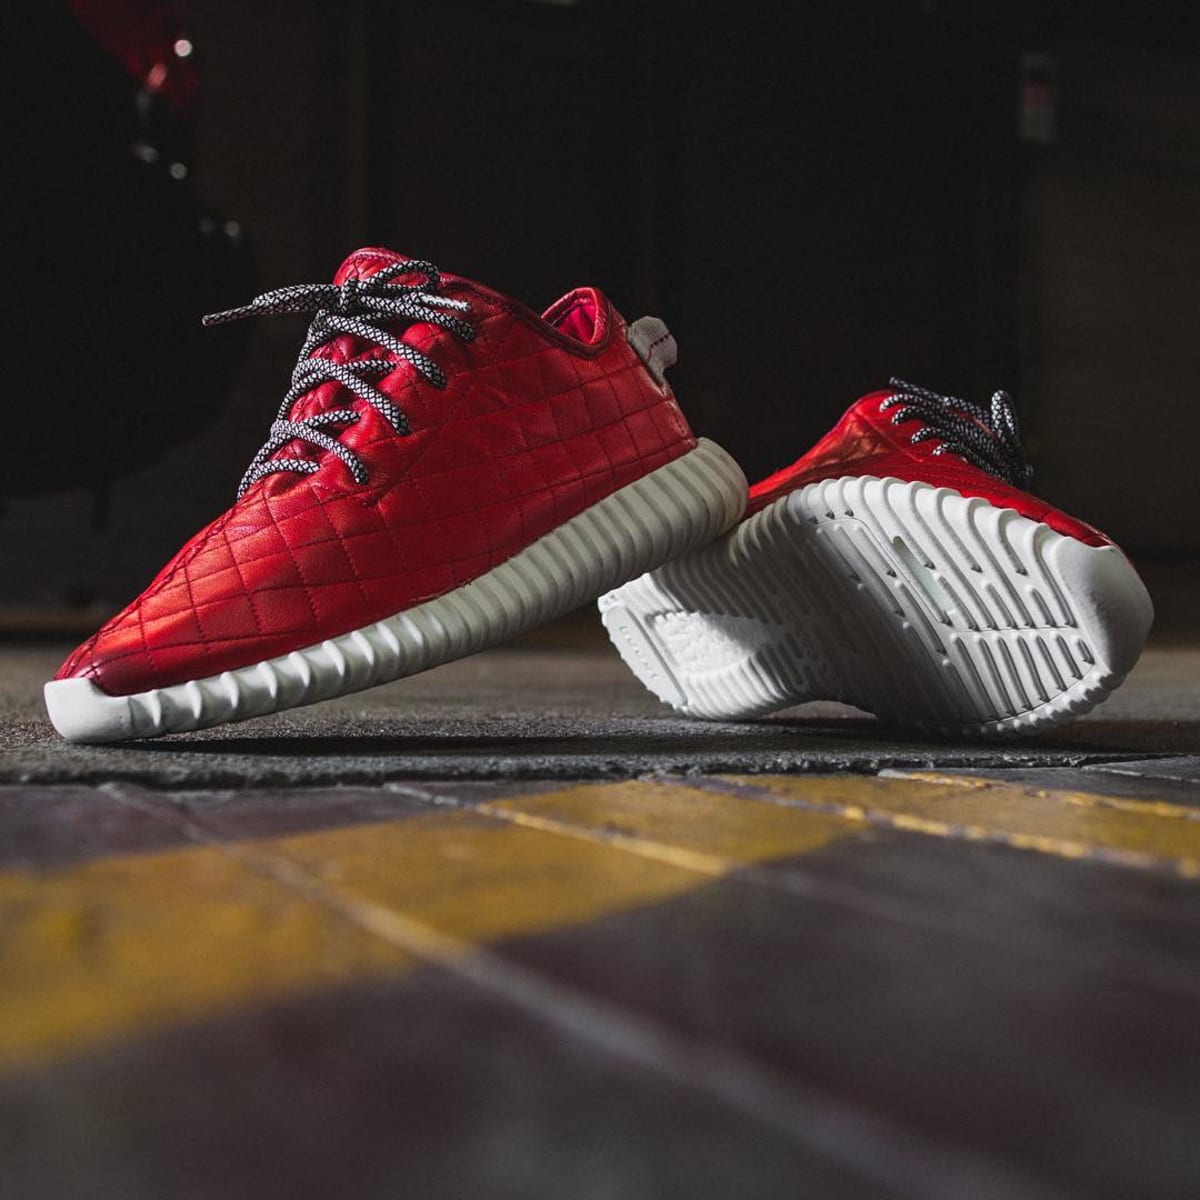 adidas Yeezy 350 Boost Quilted Leather Custom by The Shoe Surgeon ...